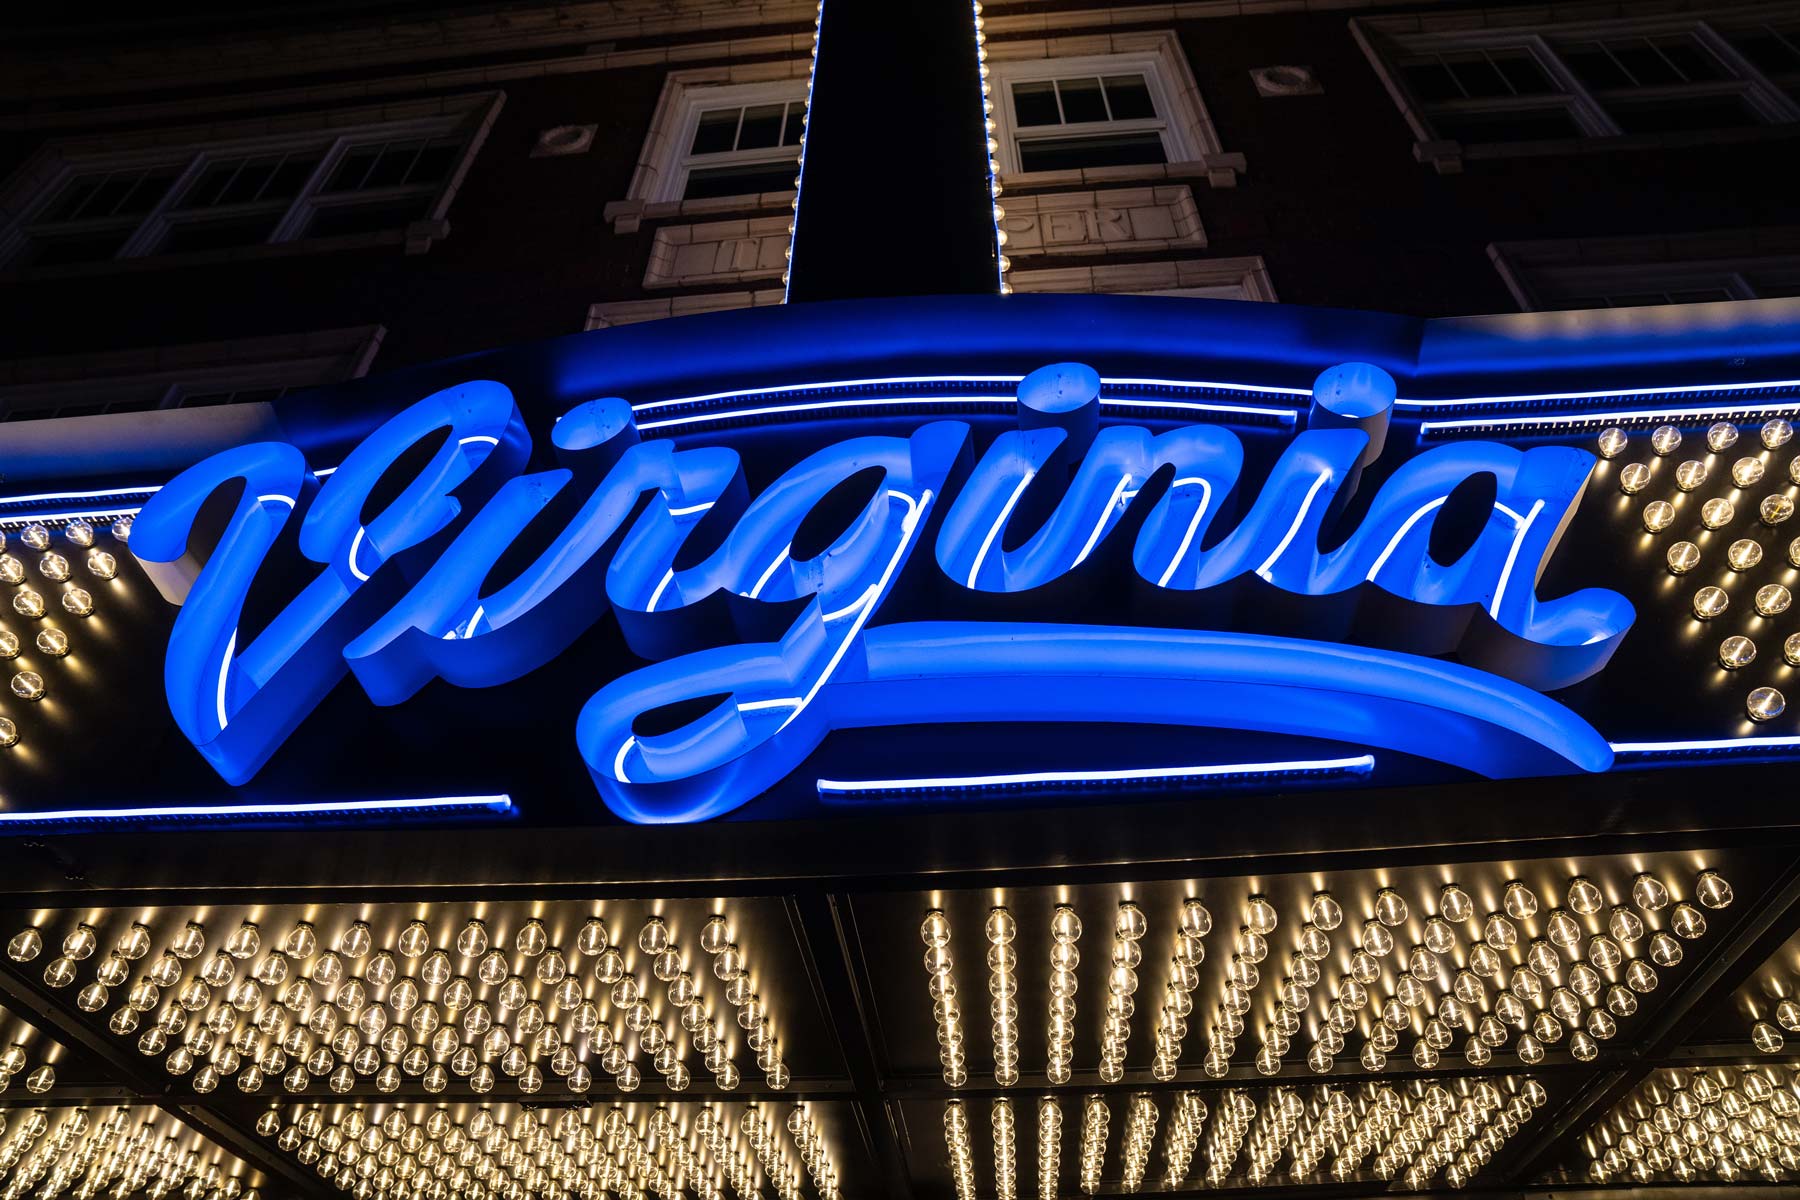 Neon "Virginia" sign on marquee